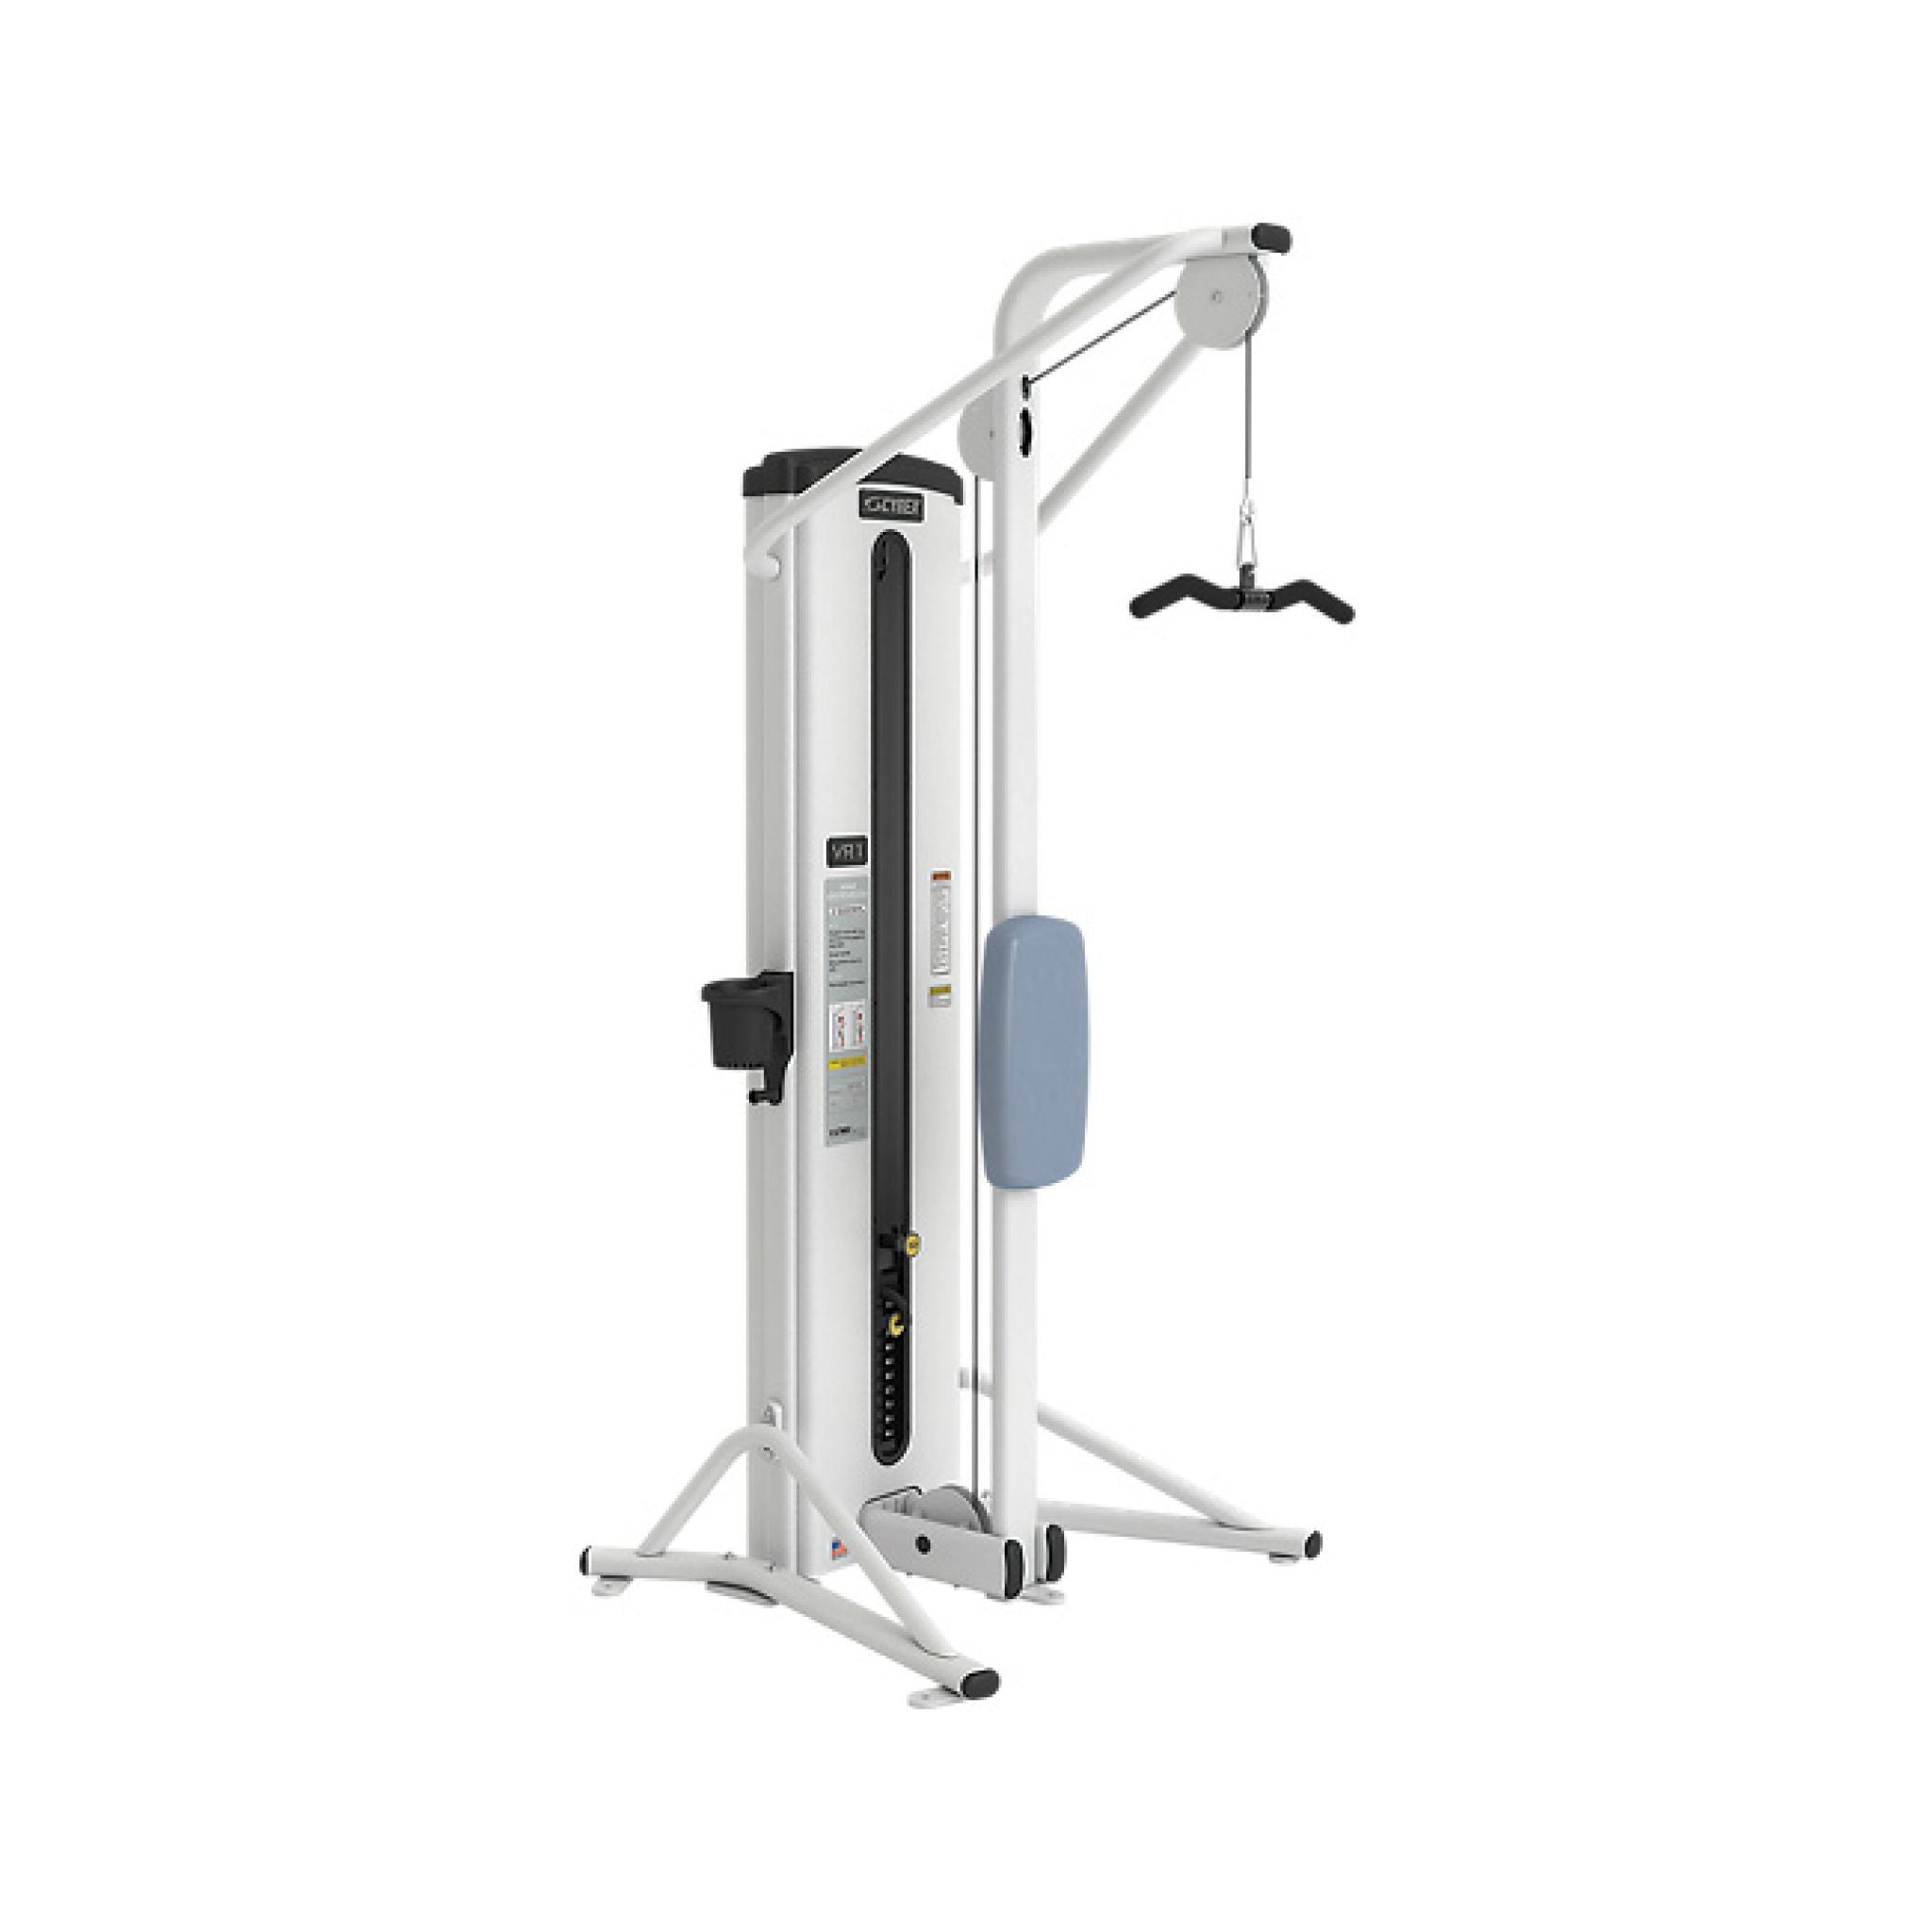 Front view of the Cybex VR1 Standing Arm Extension